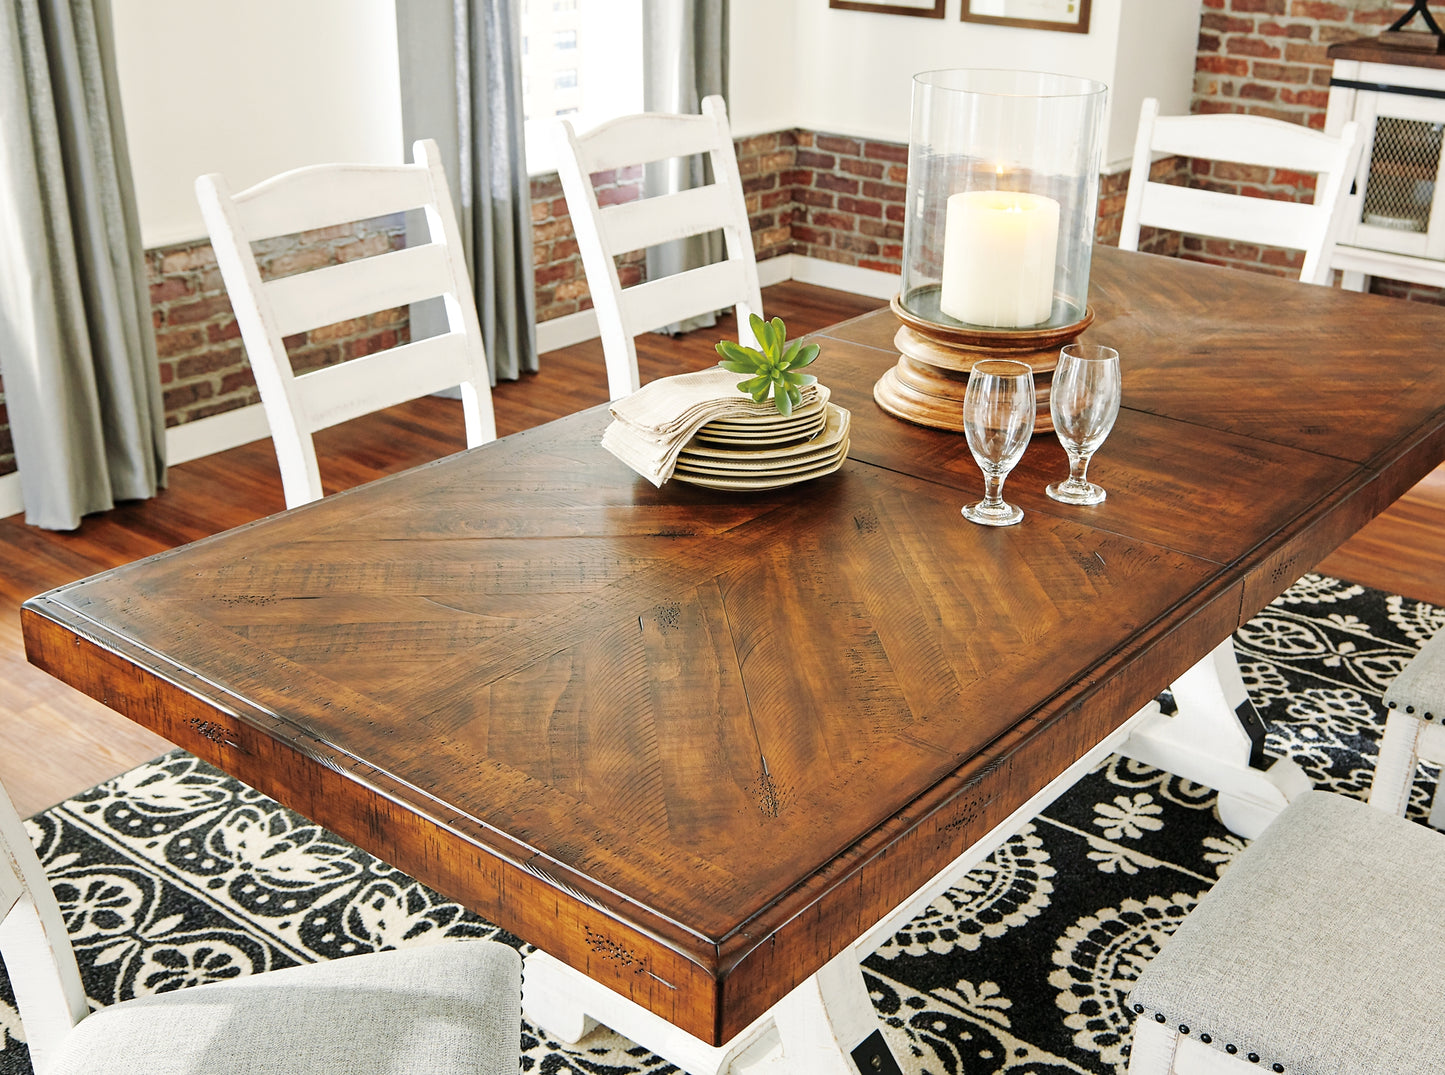 Valebeck Dining Table and 8 Chairs Wilson Furniture (OH)  in Bridgeport, Ohio. Serving Moundsville, Richmond, Smithfield, Cadiz, & St. Clairesville